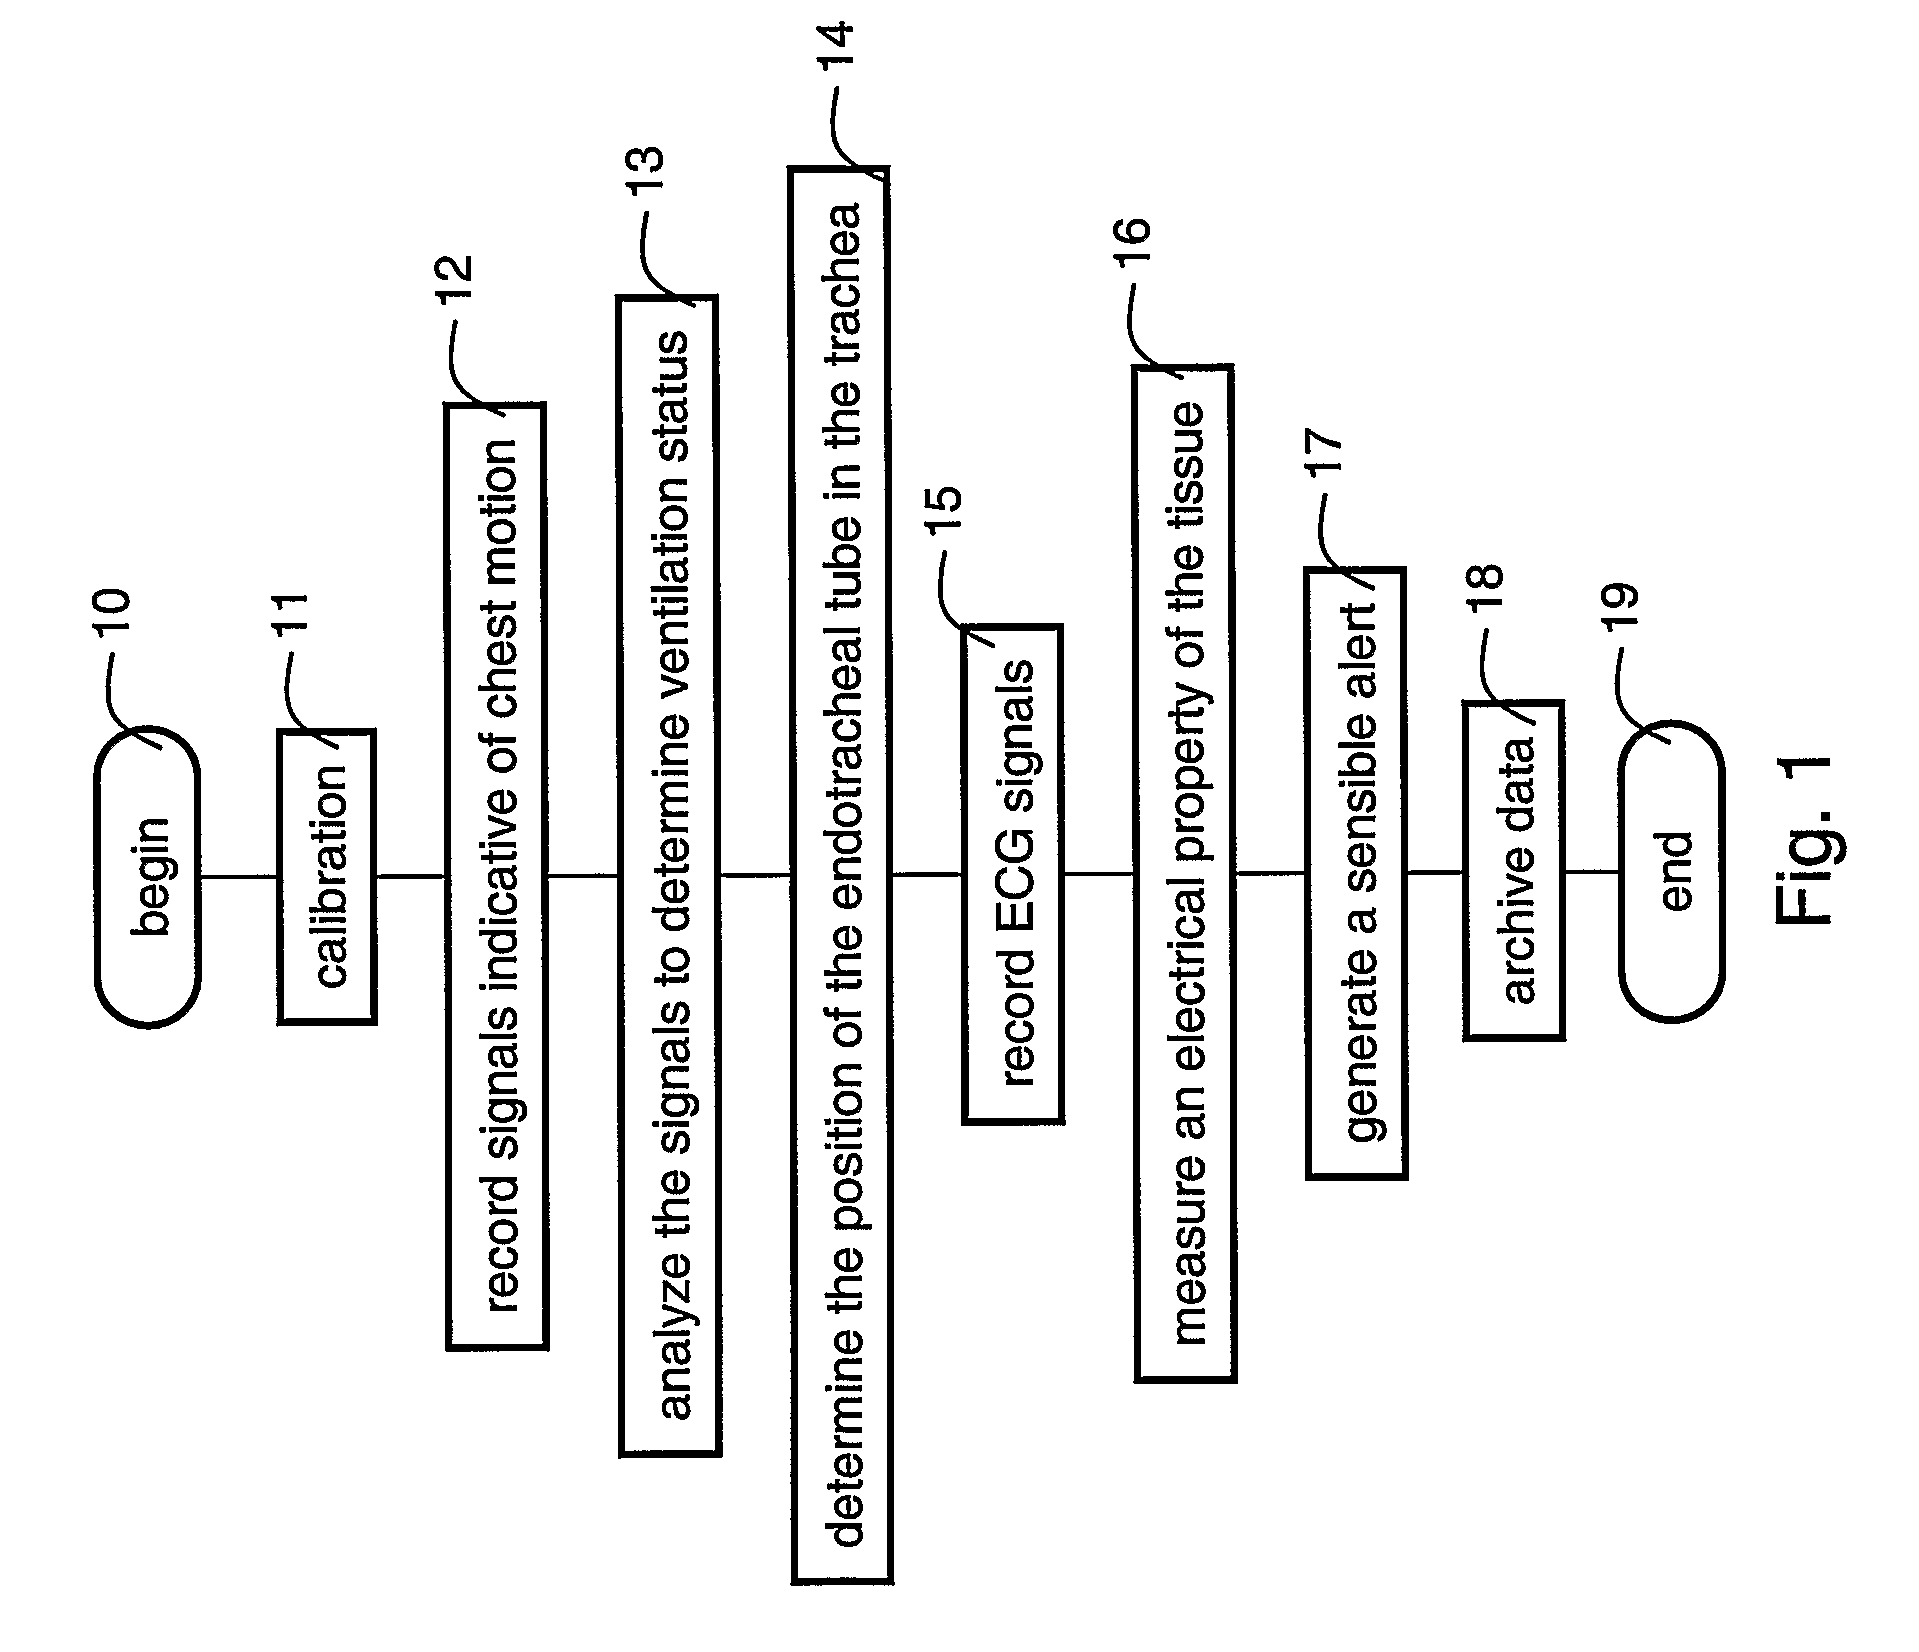 Method device and system for monitoring lung ventilation